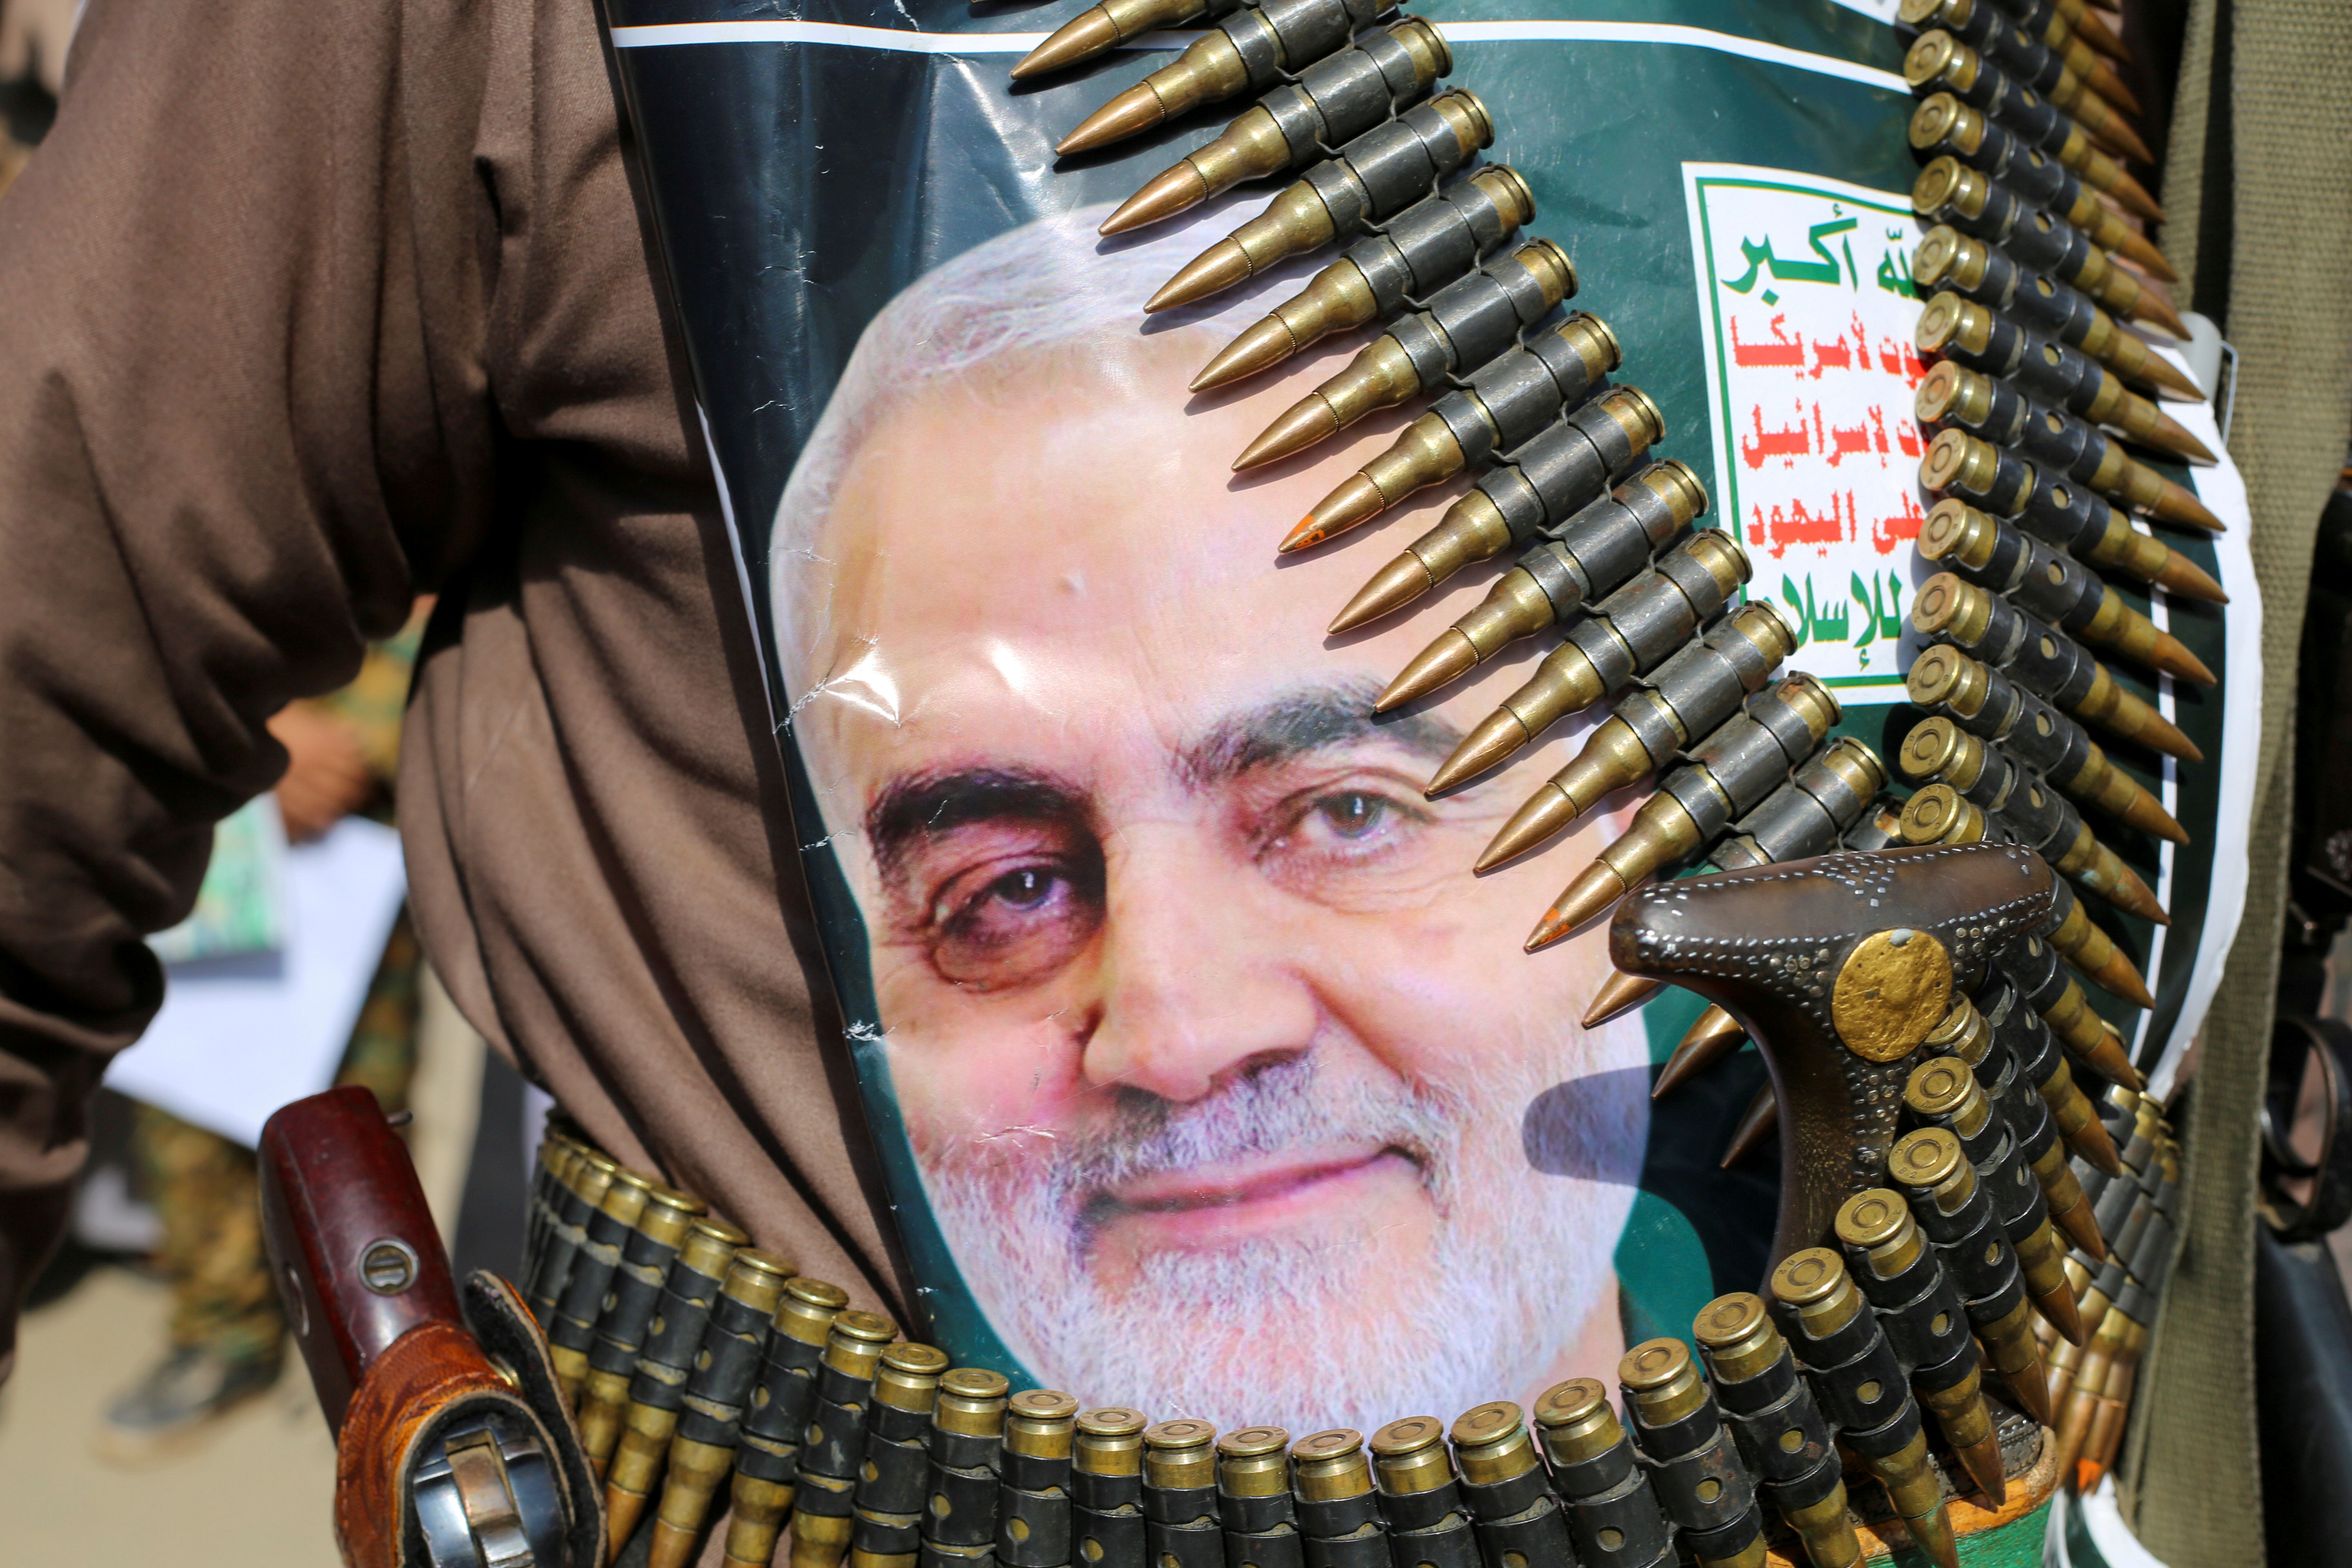 A supporter of the Houthis has a poster attached to his waist of Iranian Major-General Qassem Soleimani, head of the elite Quds Force, who was killed in an air strike at Baghdad airport, during a rally to denounce the U.S. killing, in Saada